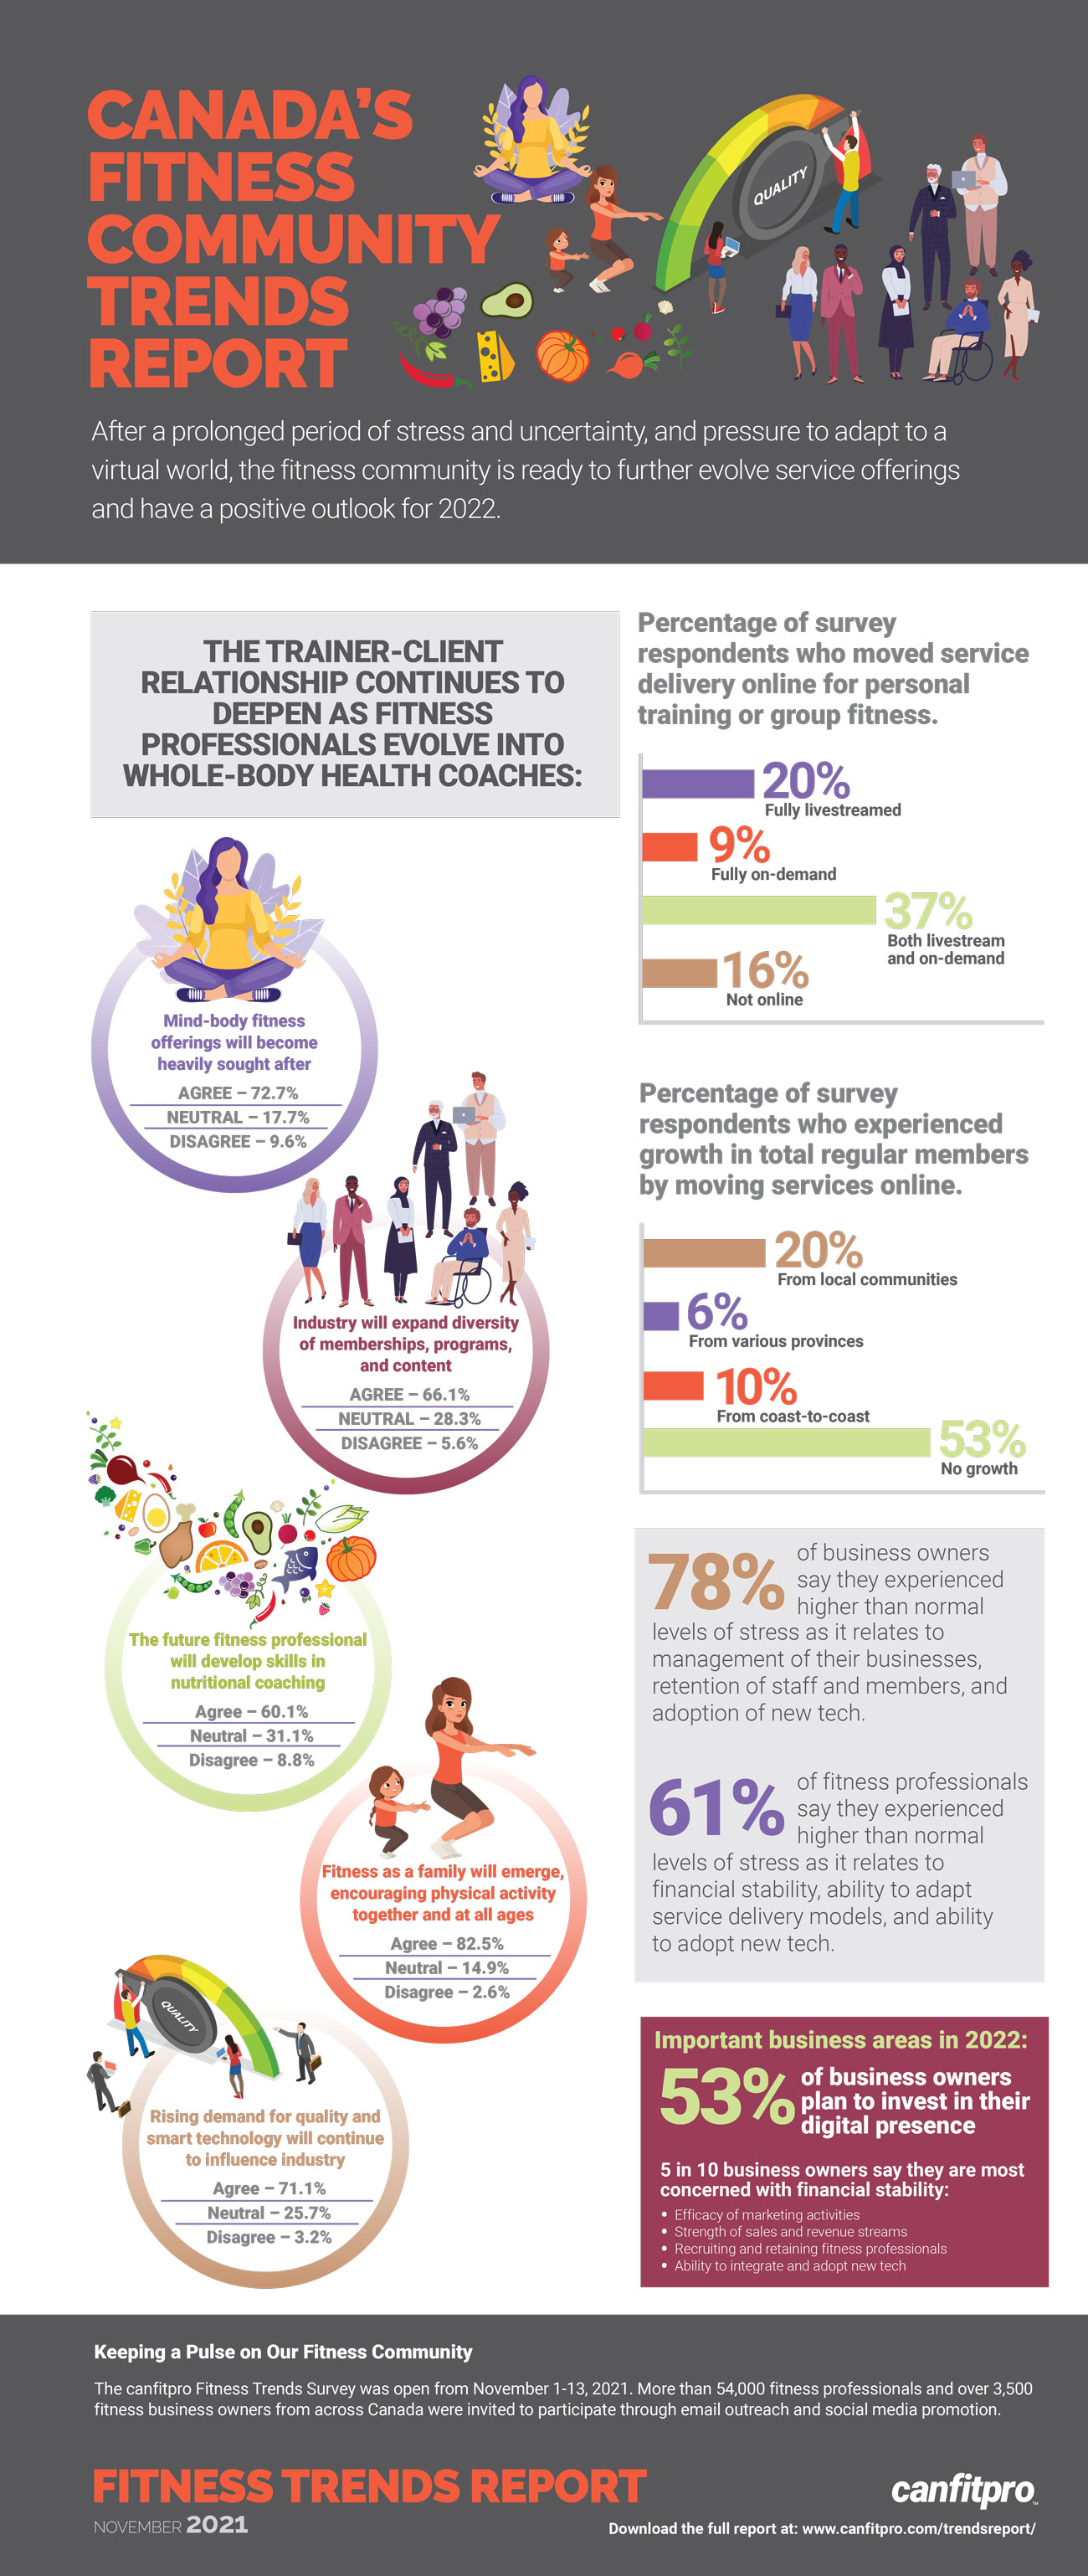 Canada's fitness community trends report